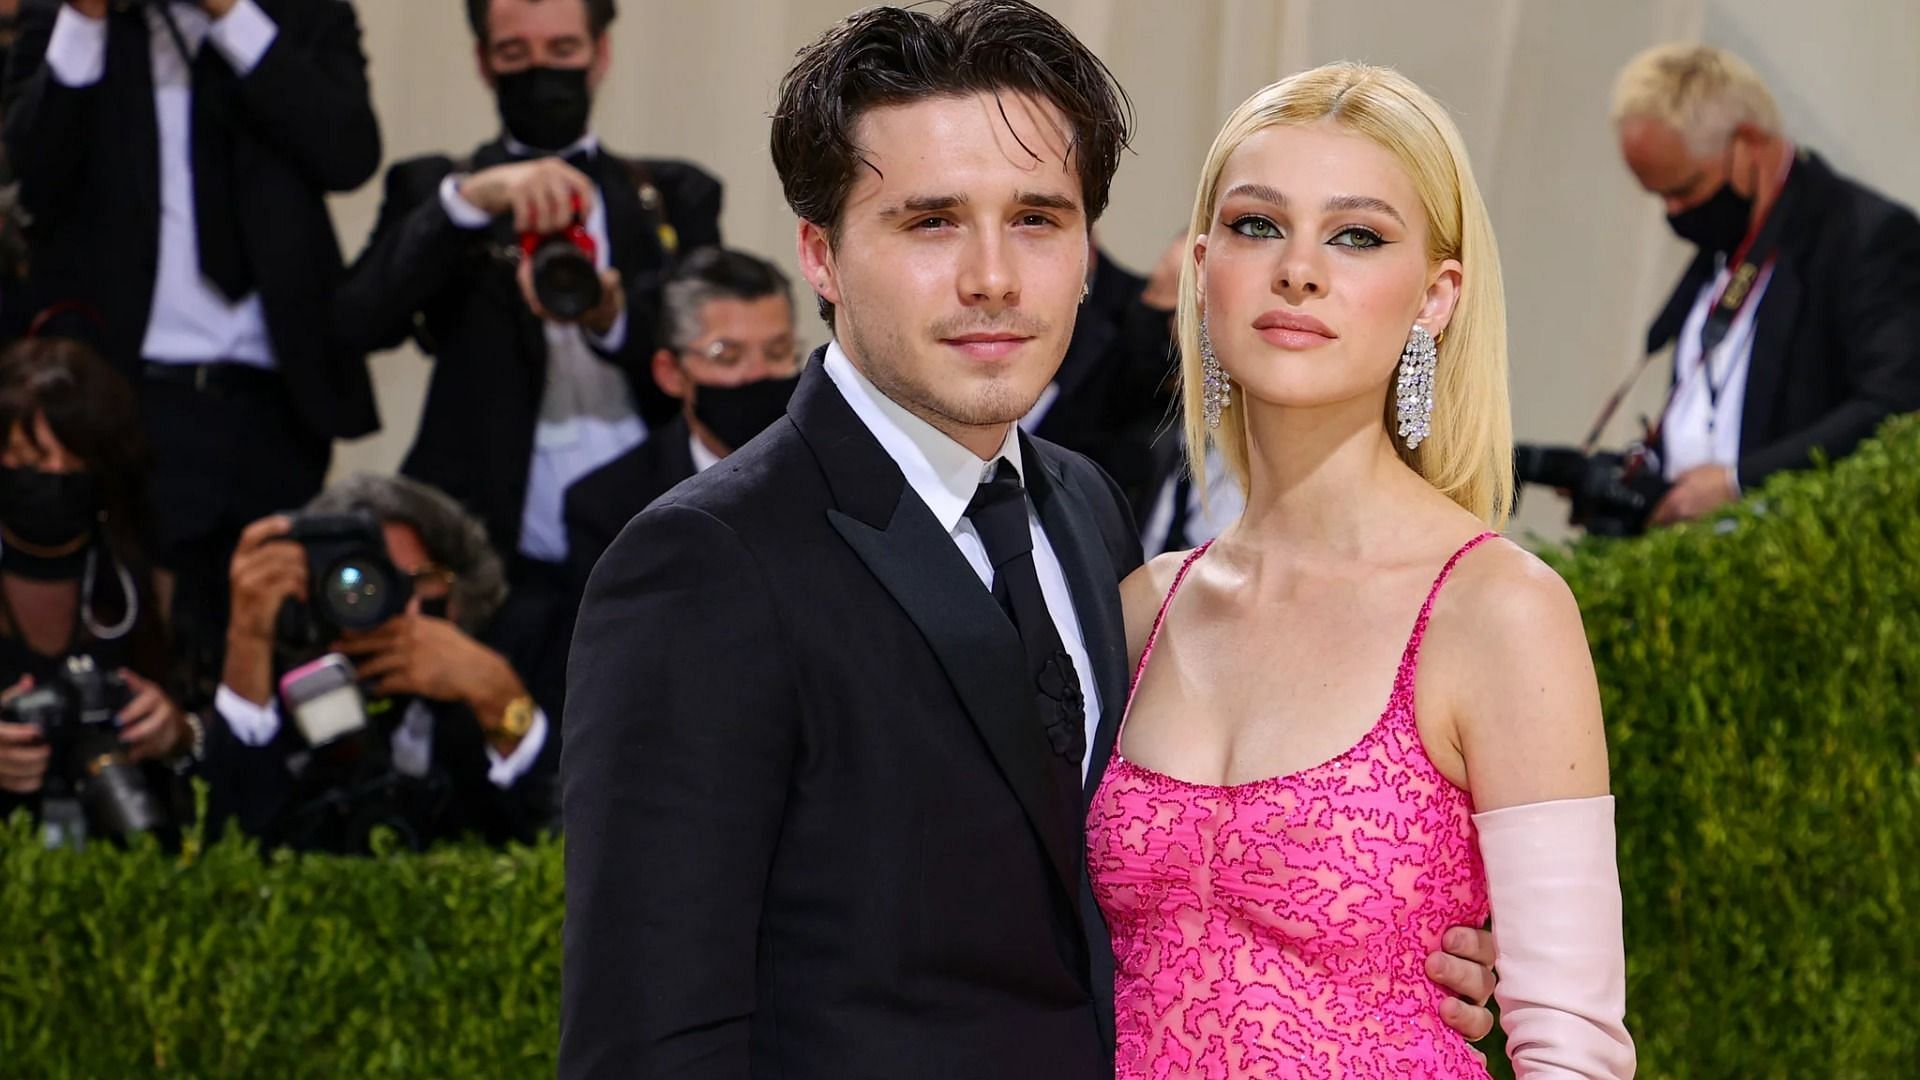 Brooklyn Beckham and Nicola Peltz first sparked dating rumors in October 2019 (Image via Theo Wargo/Getty Images)